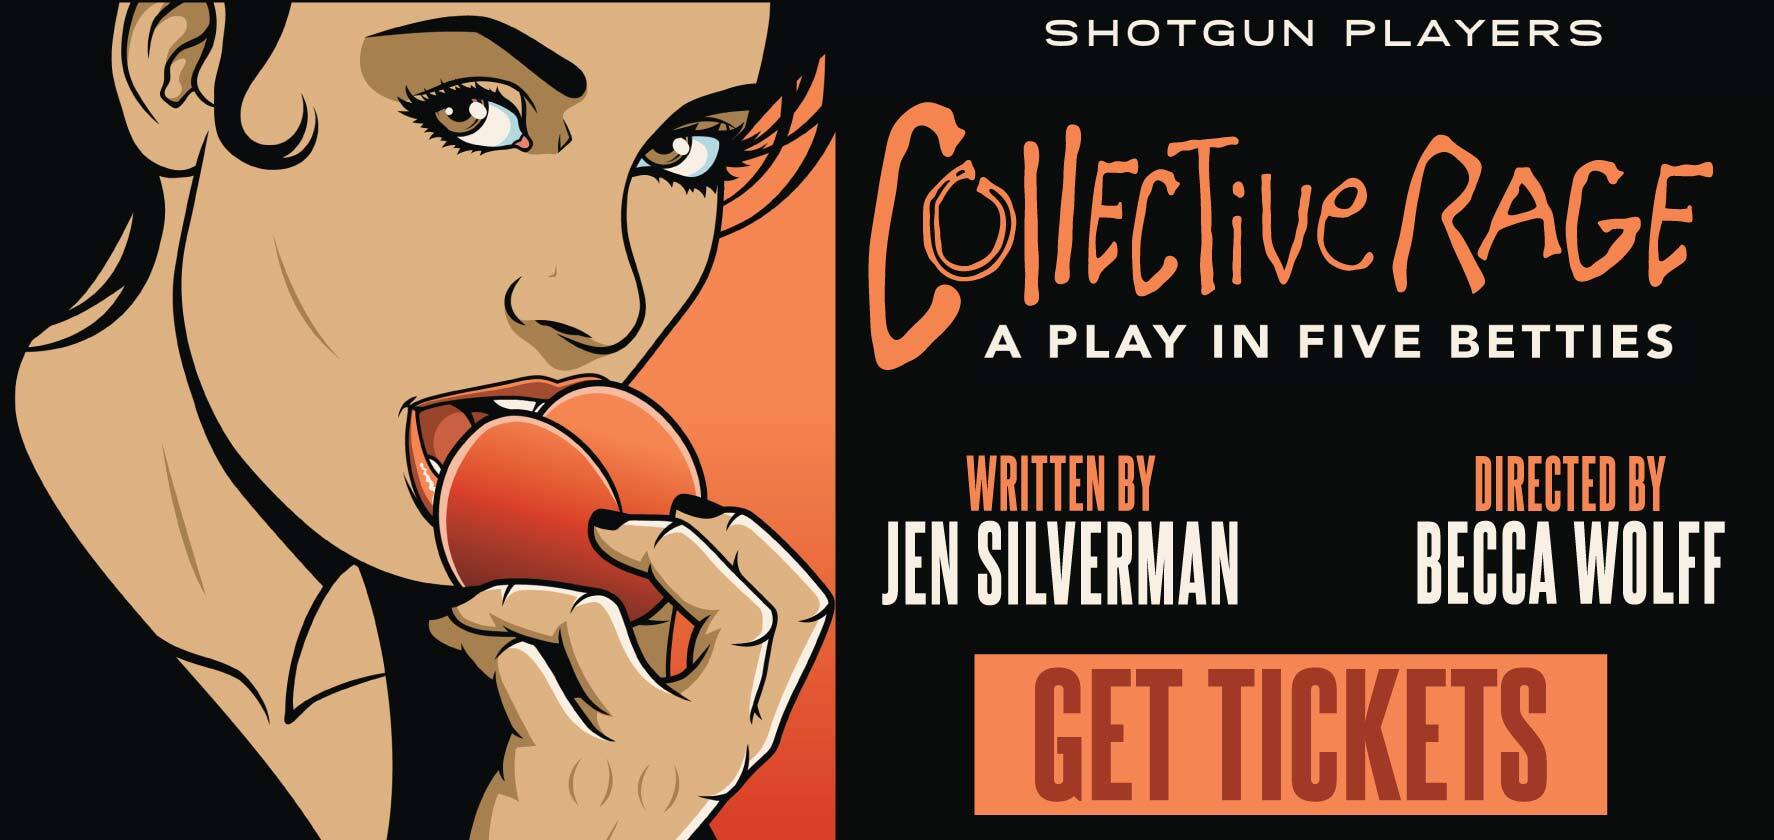 Shotgun Players - Collective Rage - A Play in Five Betties - Get Tickets